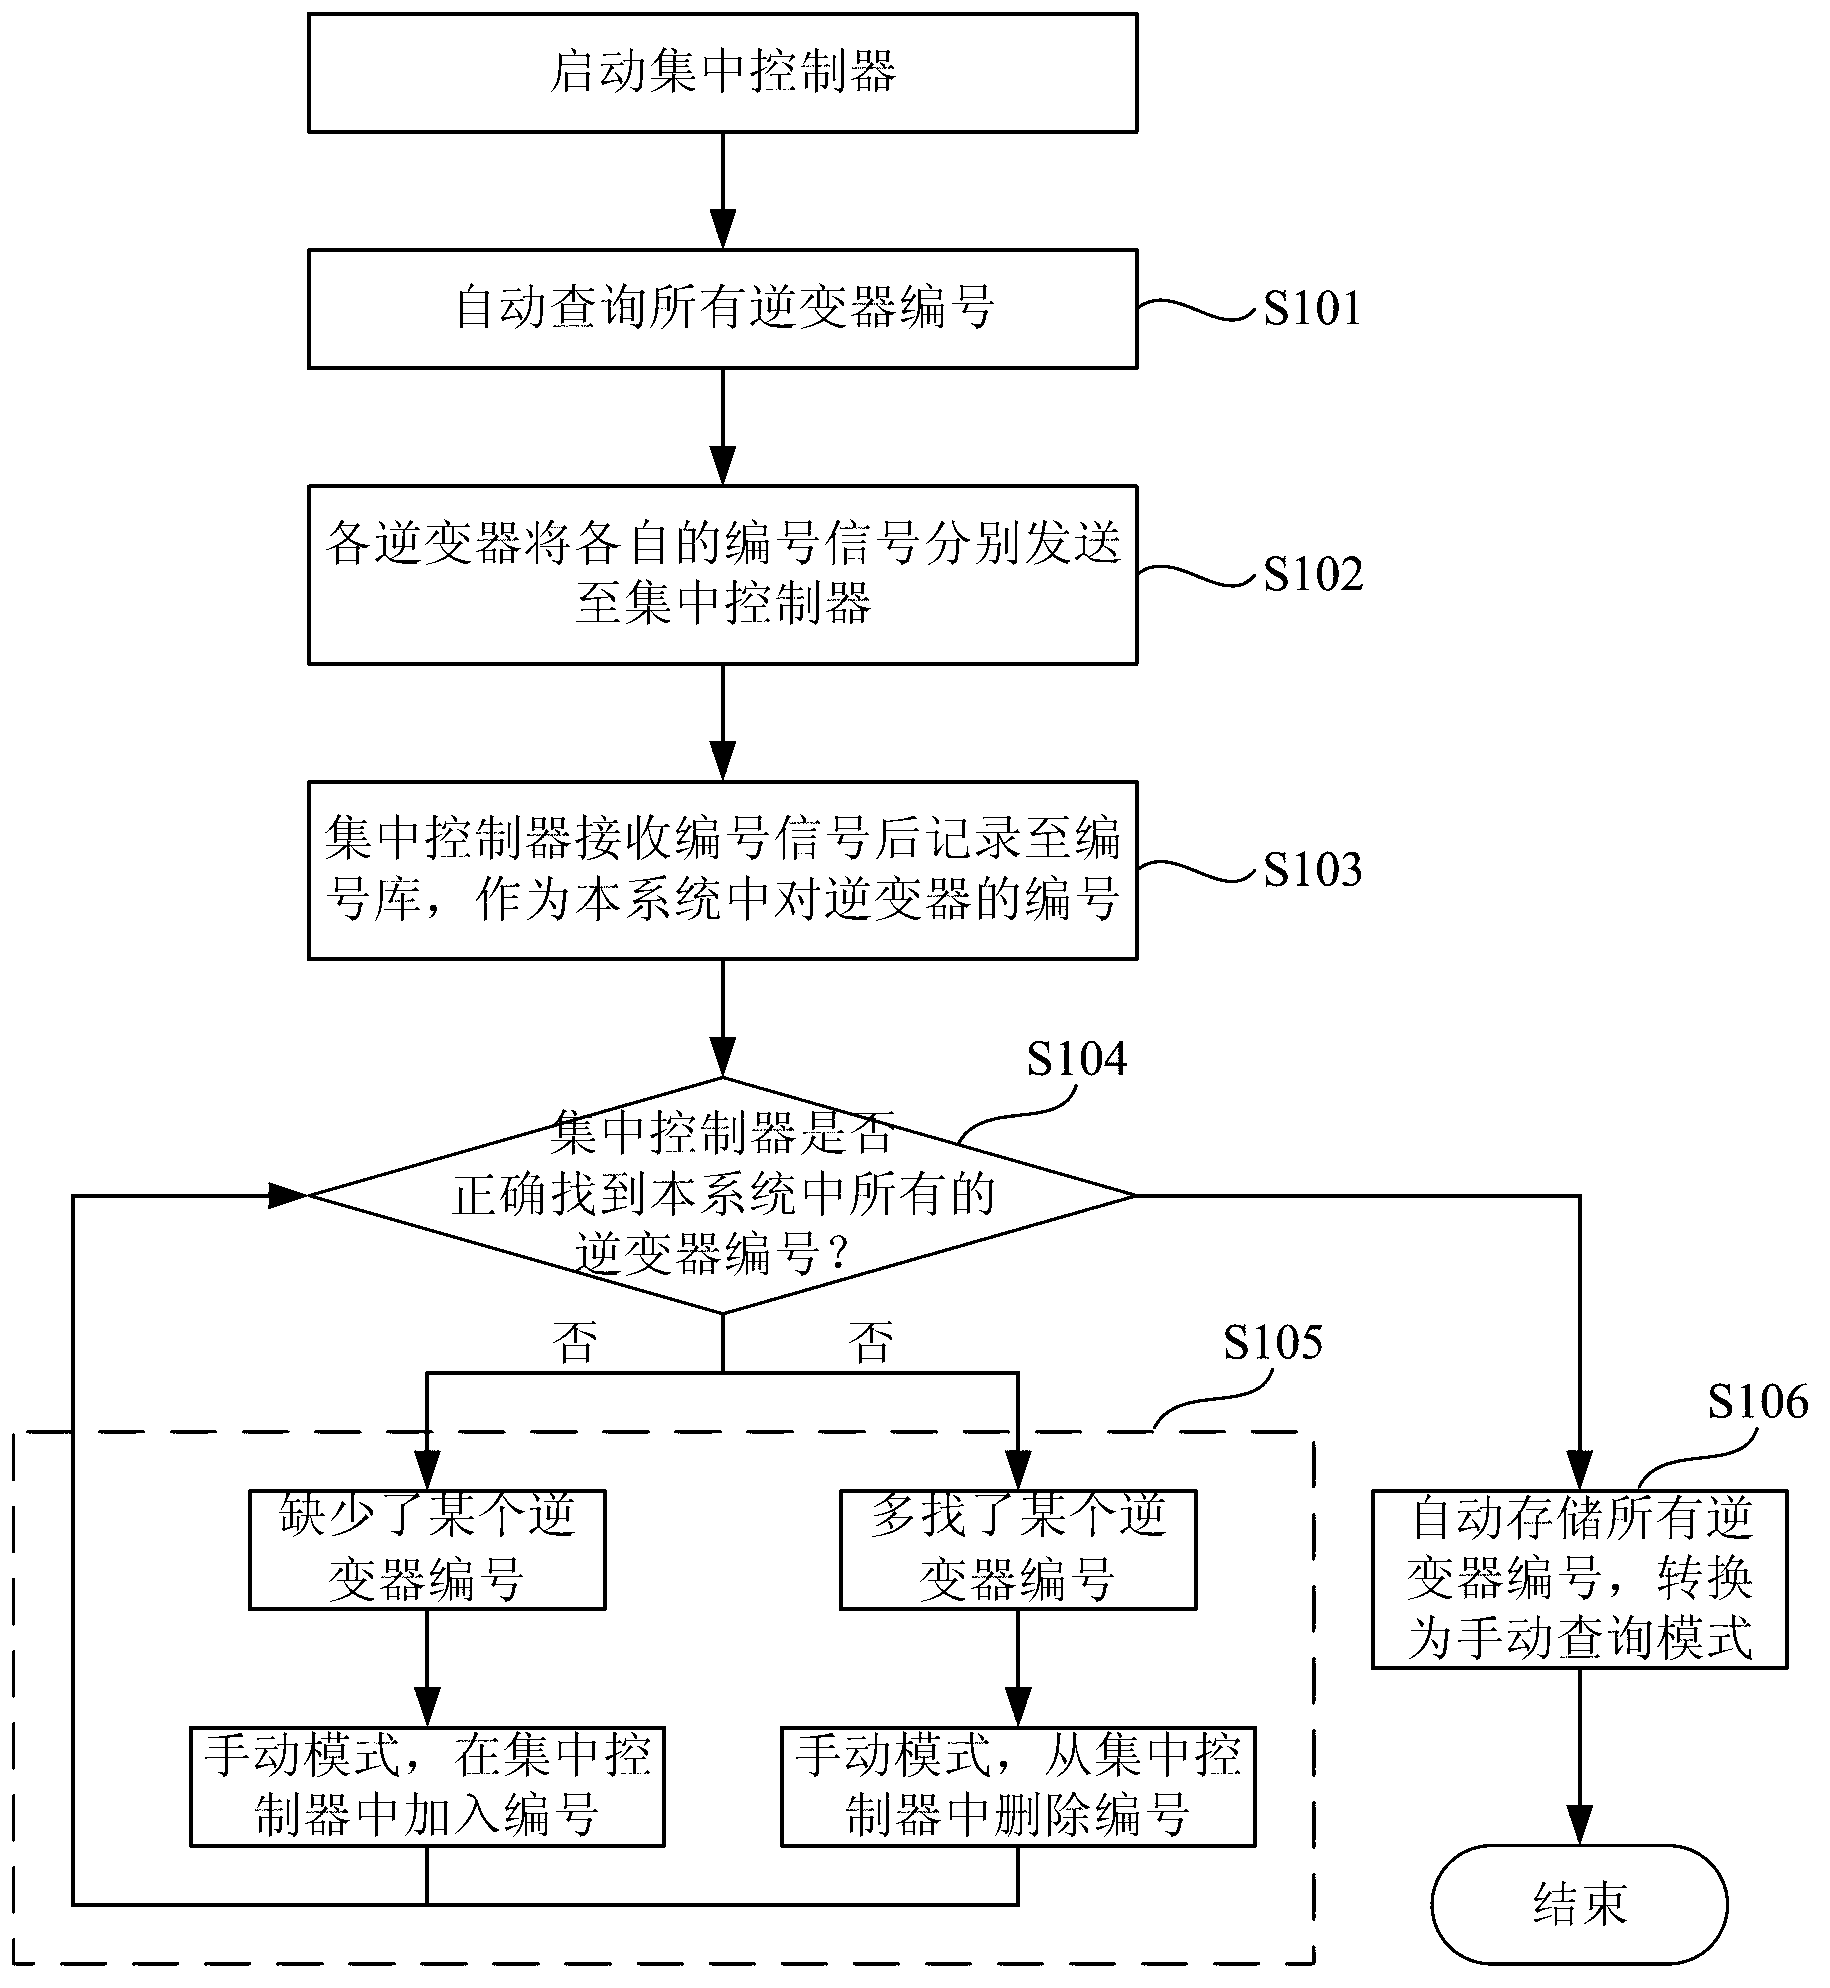 Method for querying inverters by integrated controller in distributed multi-inverter system